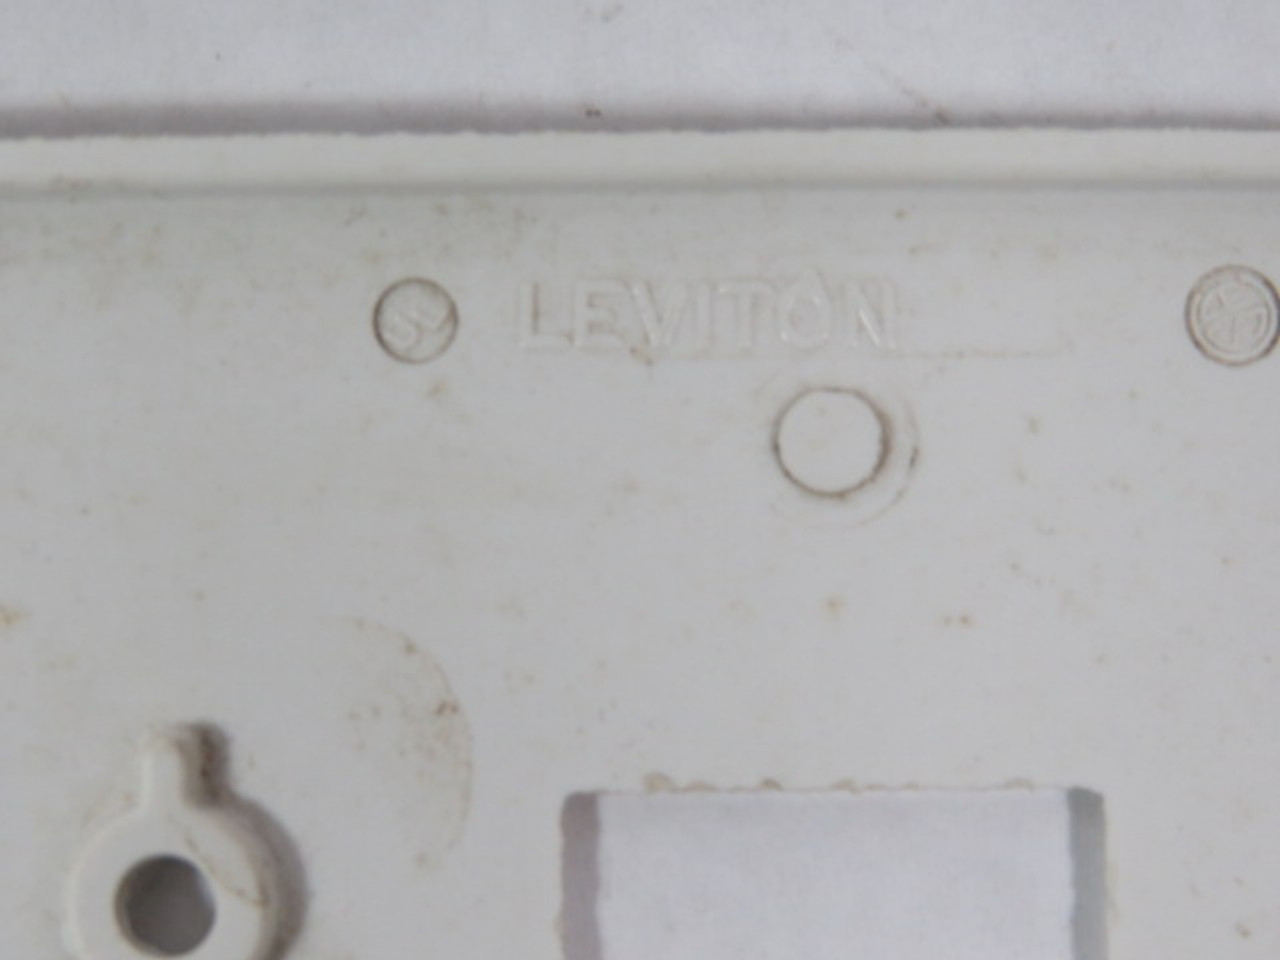 Leviton 020-88001 1-Gang Toggle Switch Wall Plate White USED